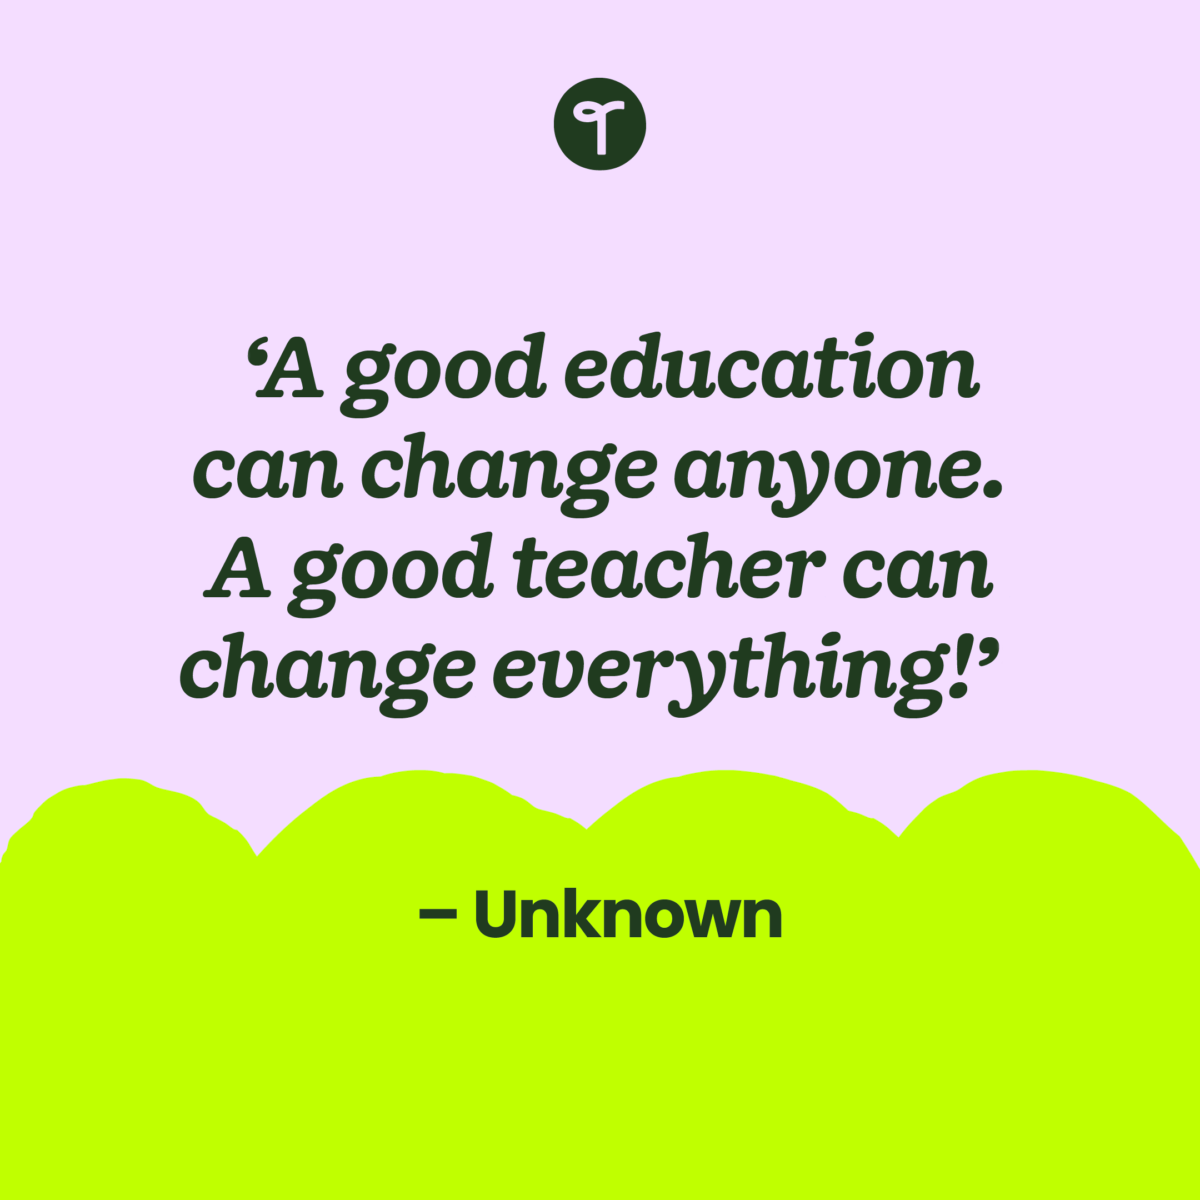 teacher quote 'A good education can change anyone. A good teacher can change everything!' written on a purple background with a lime green scalloped edge 